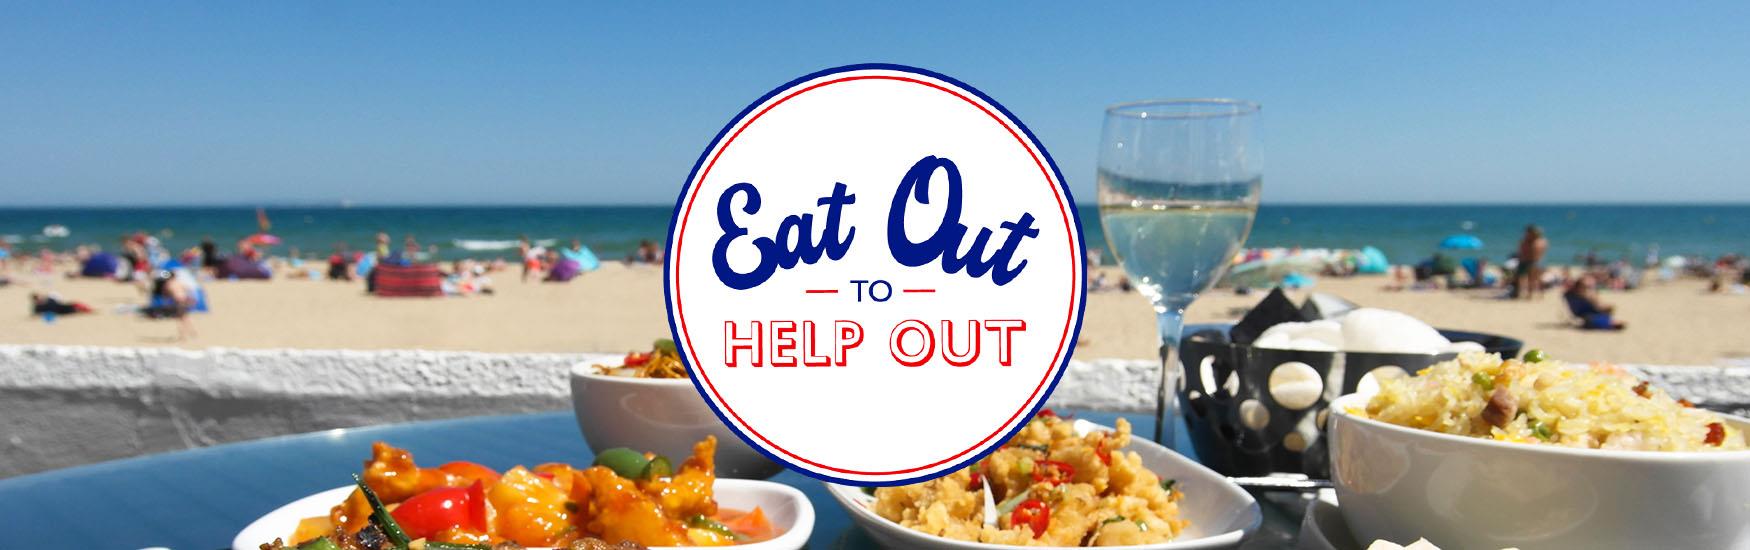 Eat out to help out header image with logo a delicious food in the background